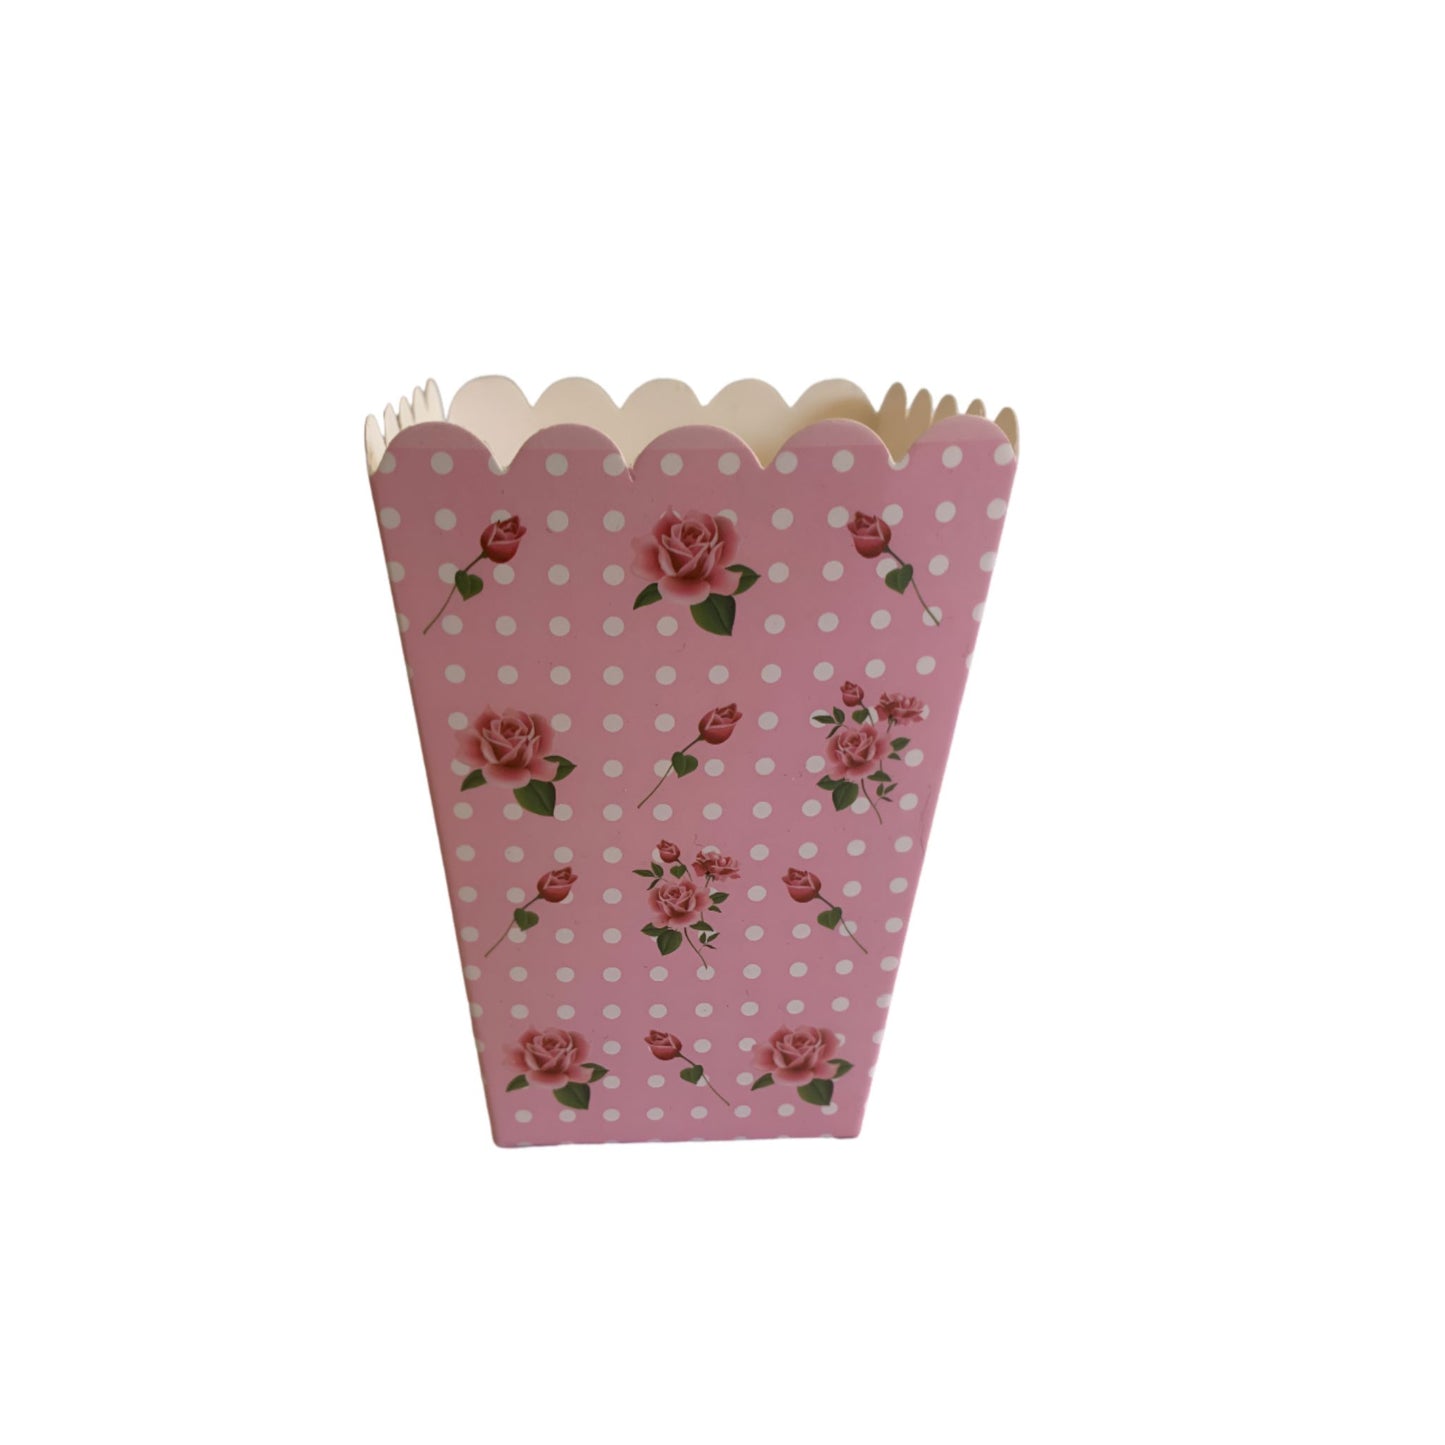 Gorgeous Mini Popcorn Box In Pink With Red Roses And White Polka Dots. 12 pack